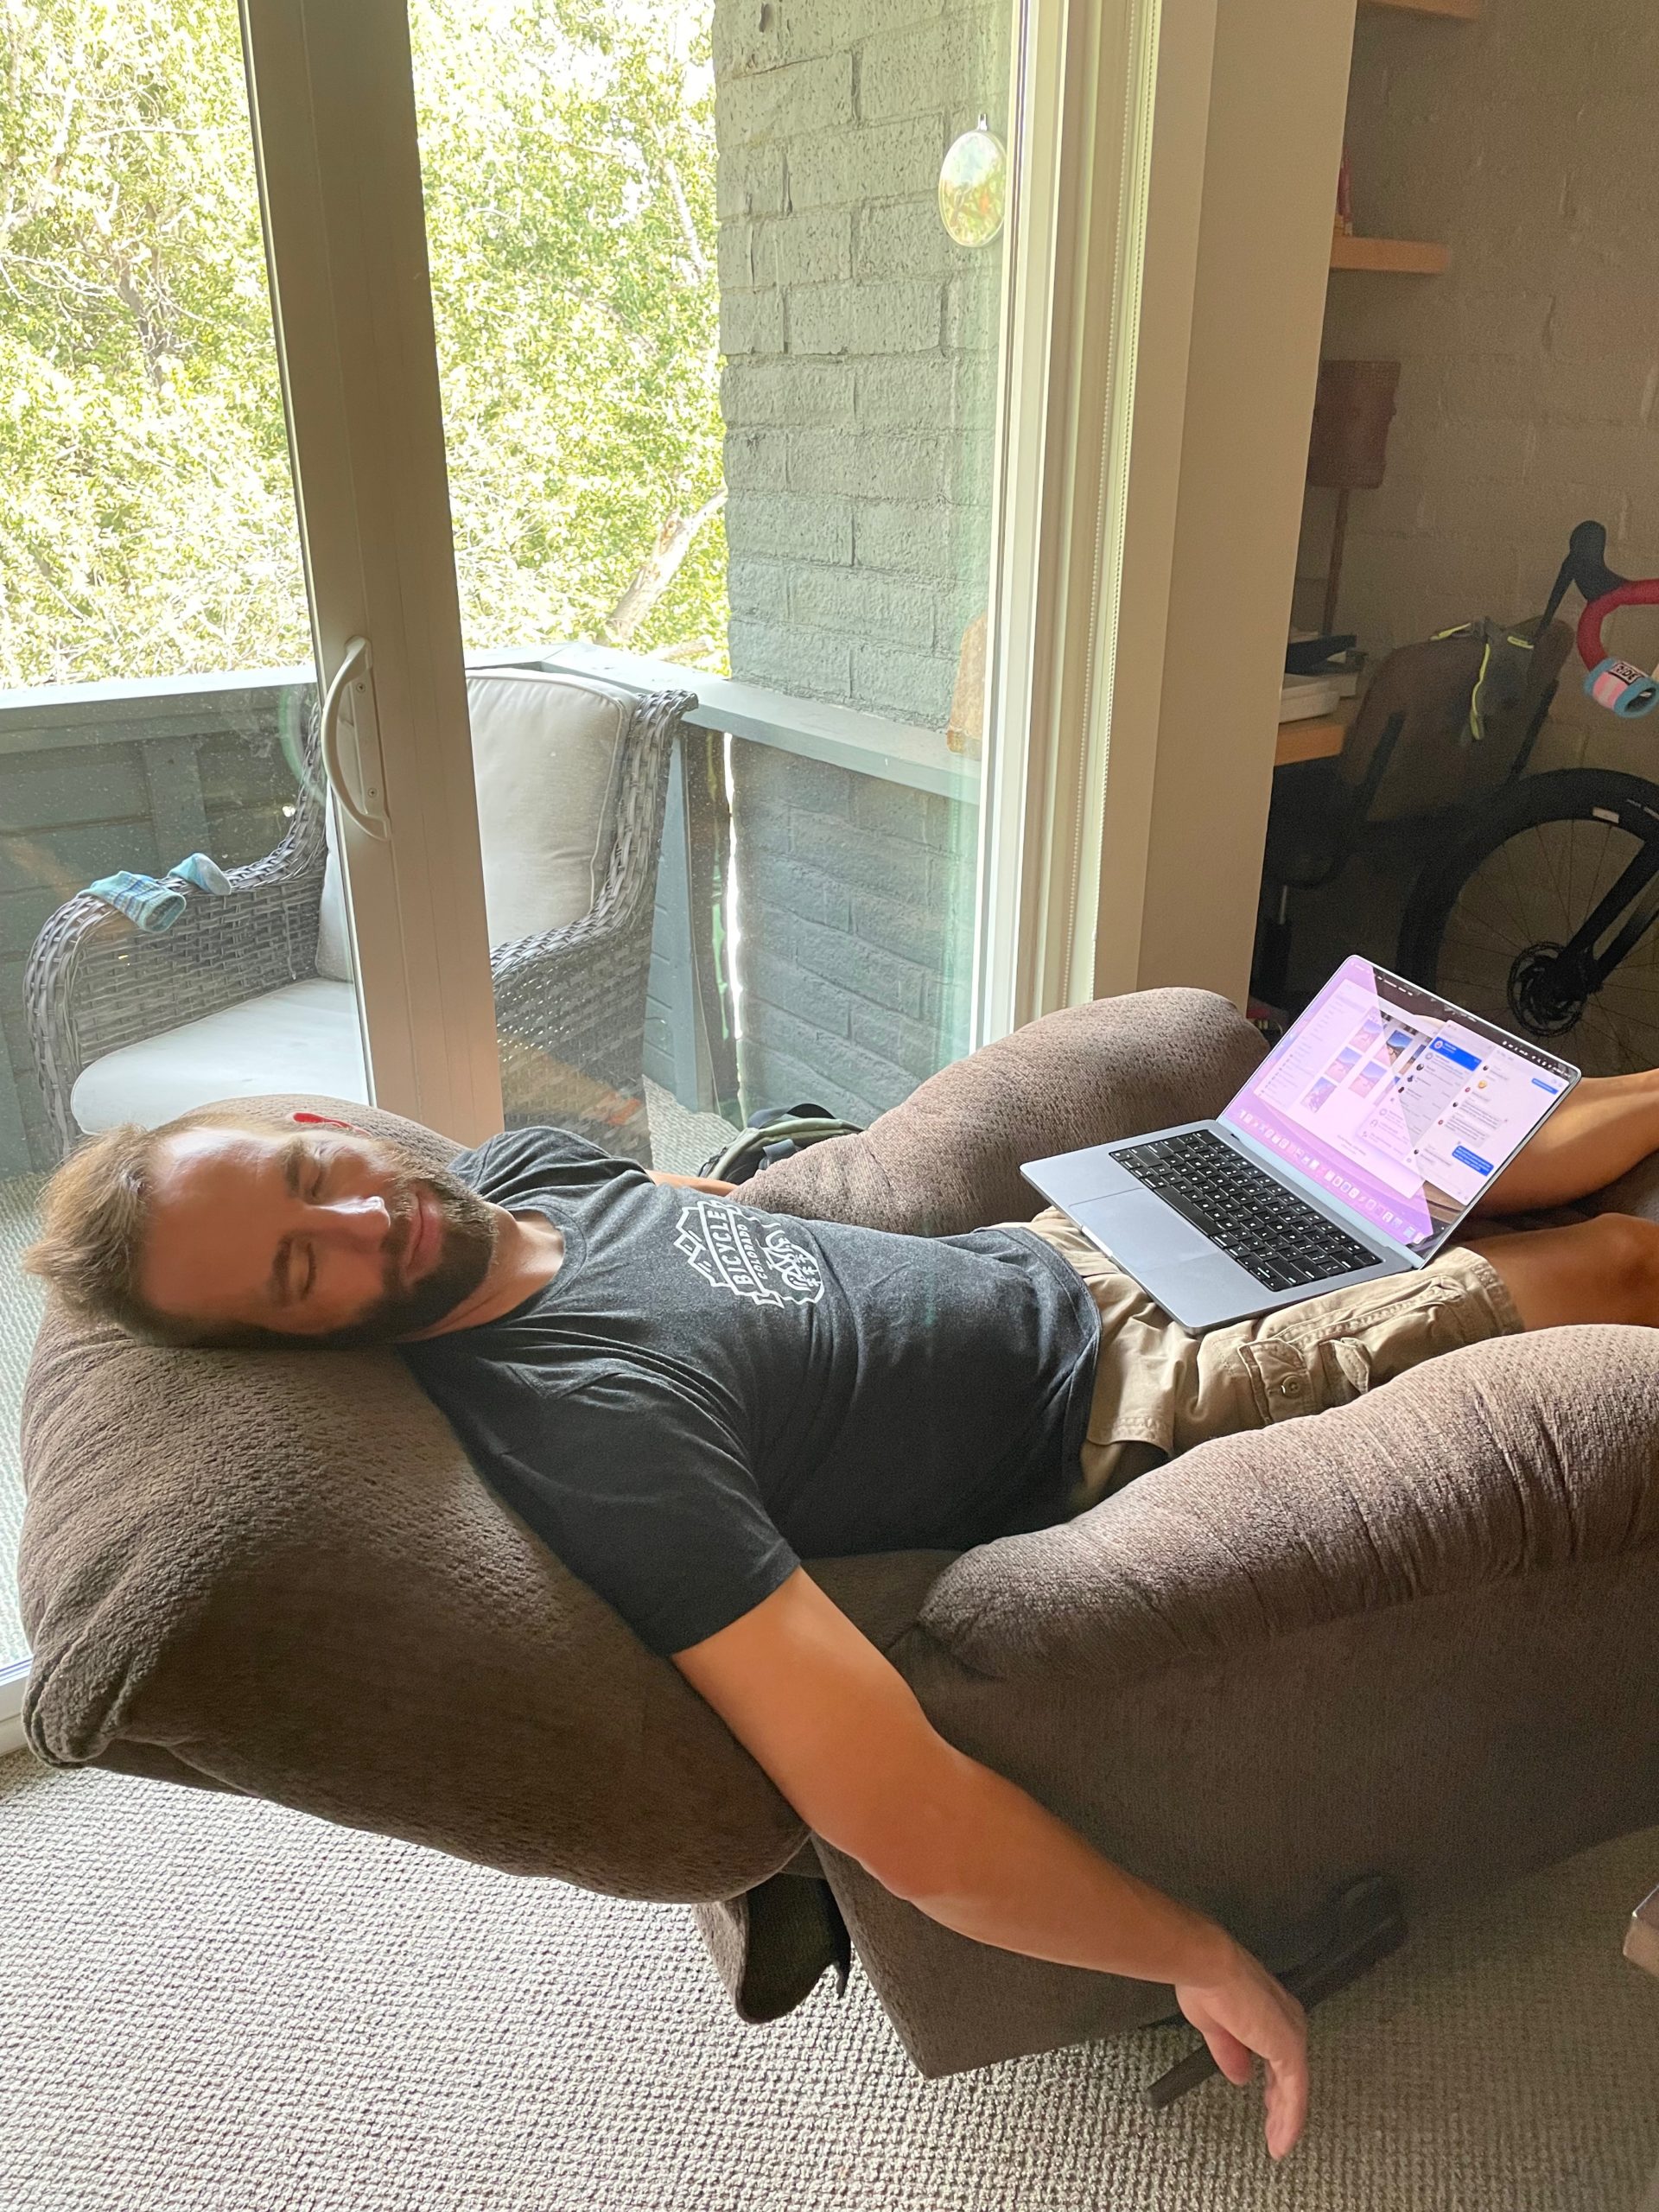 Man rests in recliner with laptop